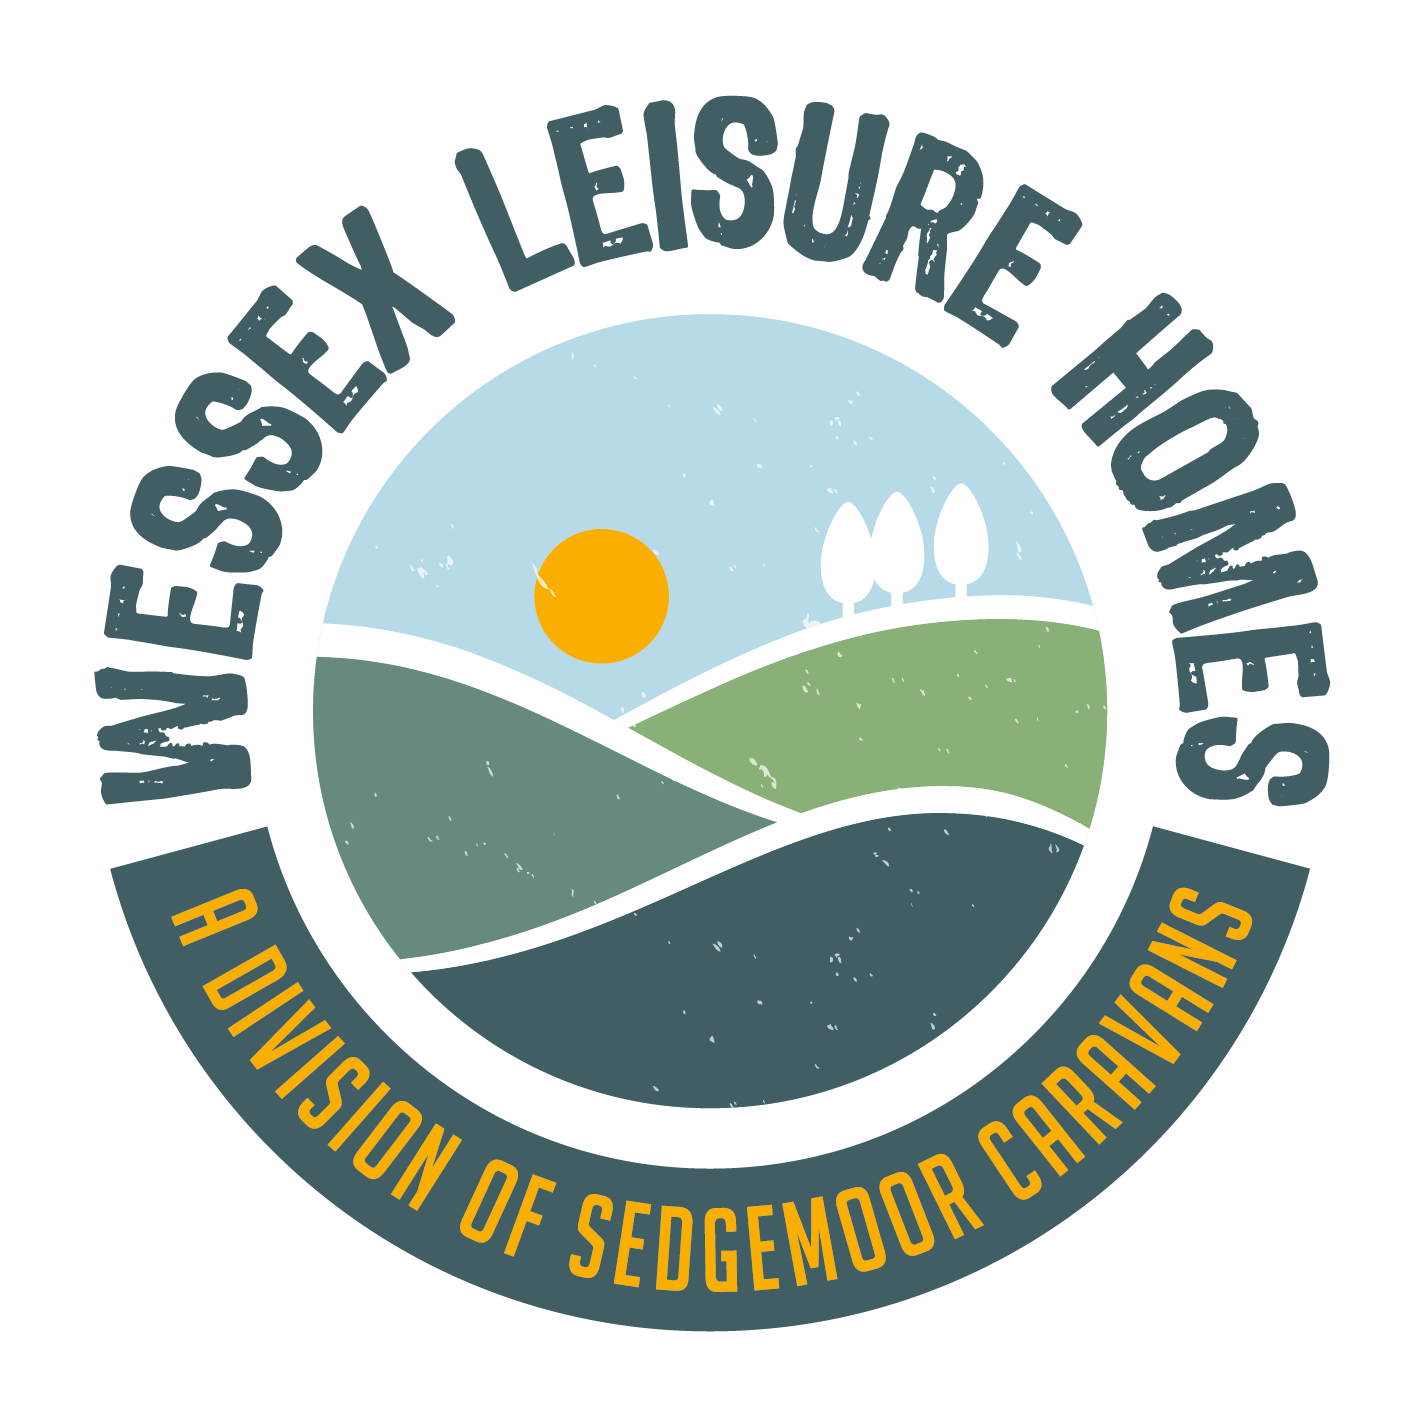 Wessex Leisure Homes